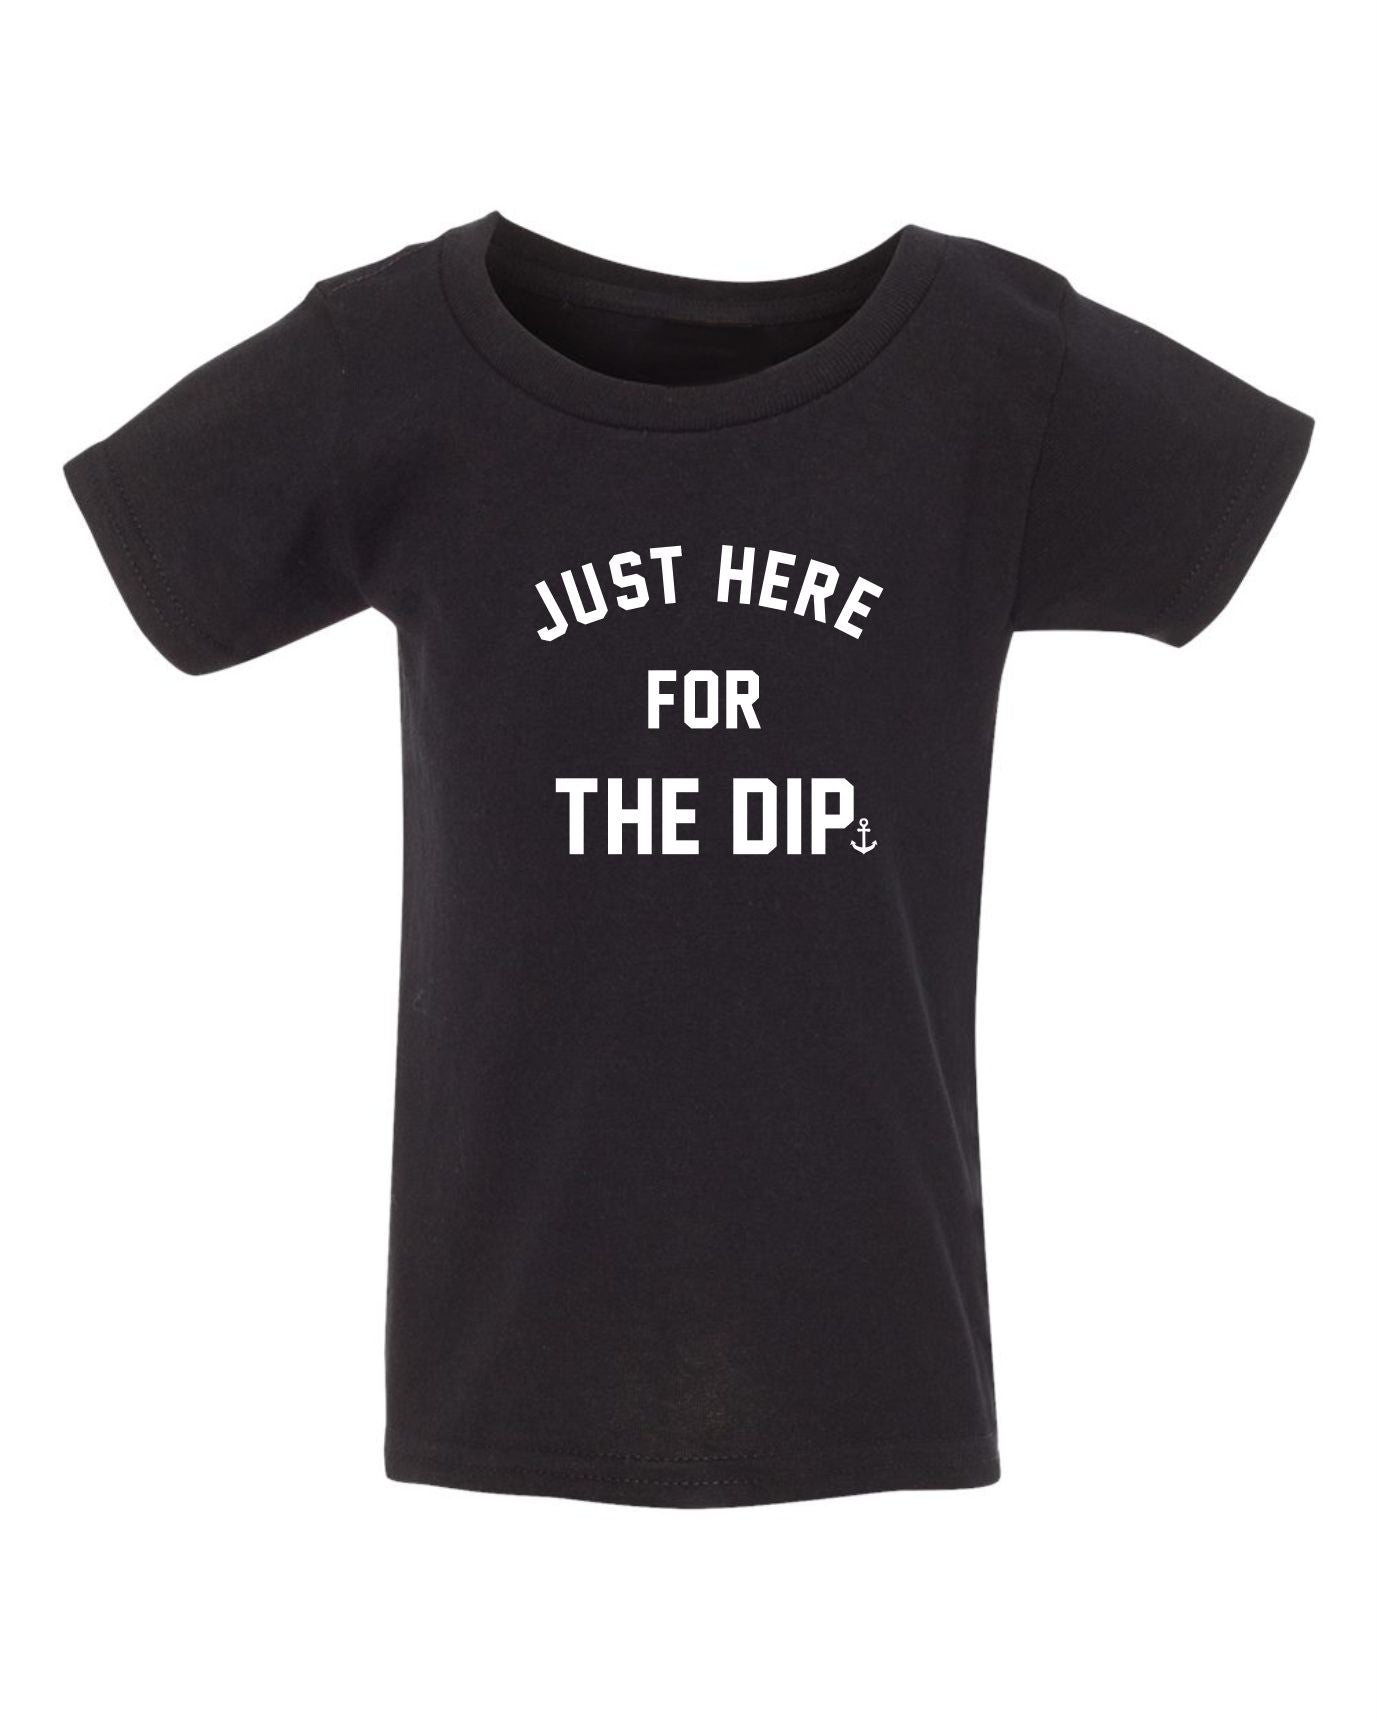 "Just Here For The Dip" Toddler/Youth T-Shirt